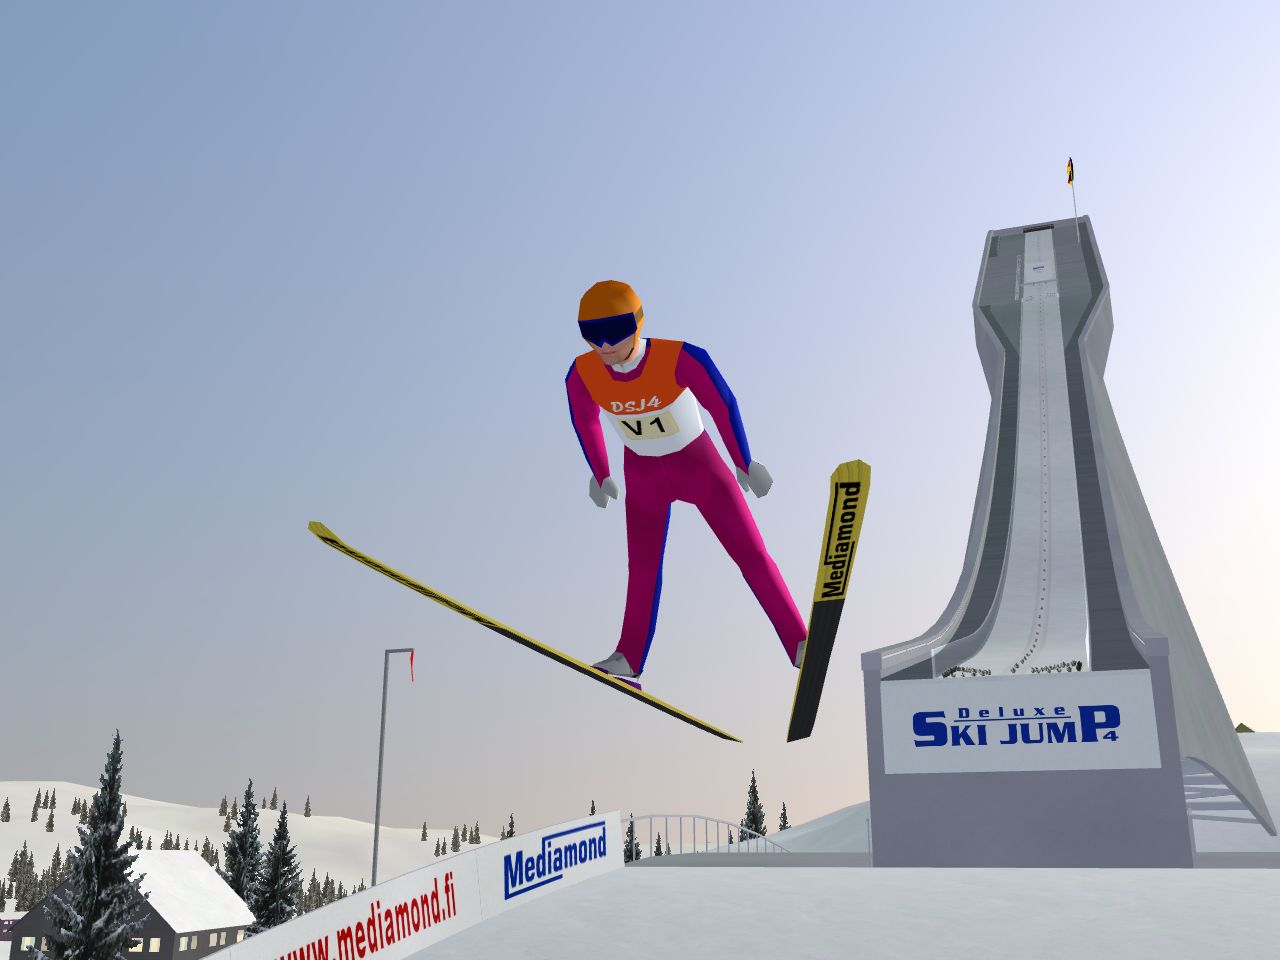 Demos Pc Deluxe Ski Jump 4 Demo Megagames with The Most Elegant  ski jumping images with regard to Encourage